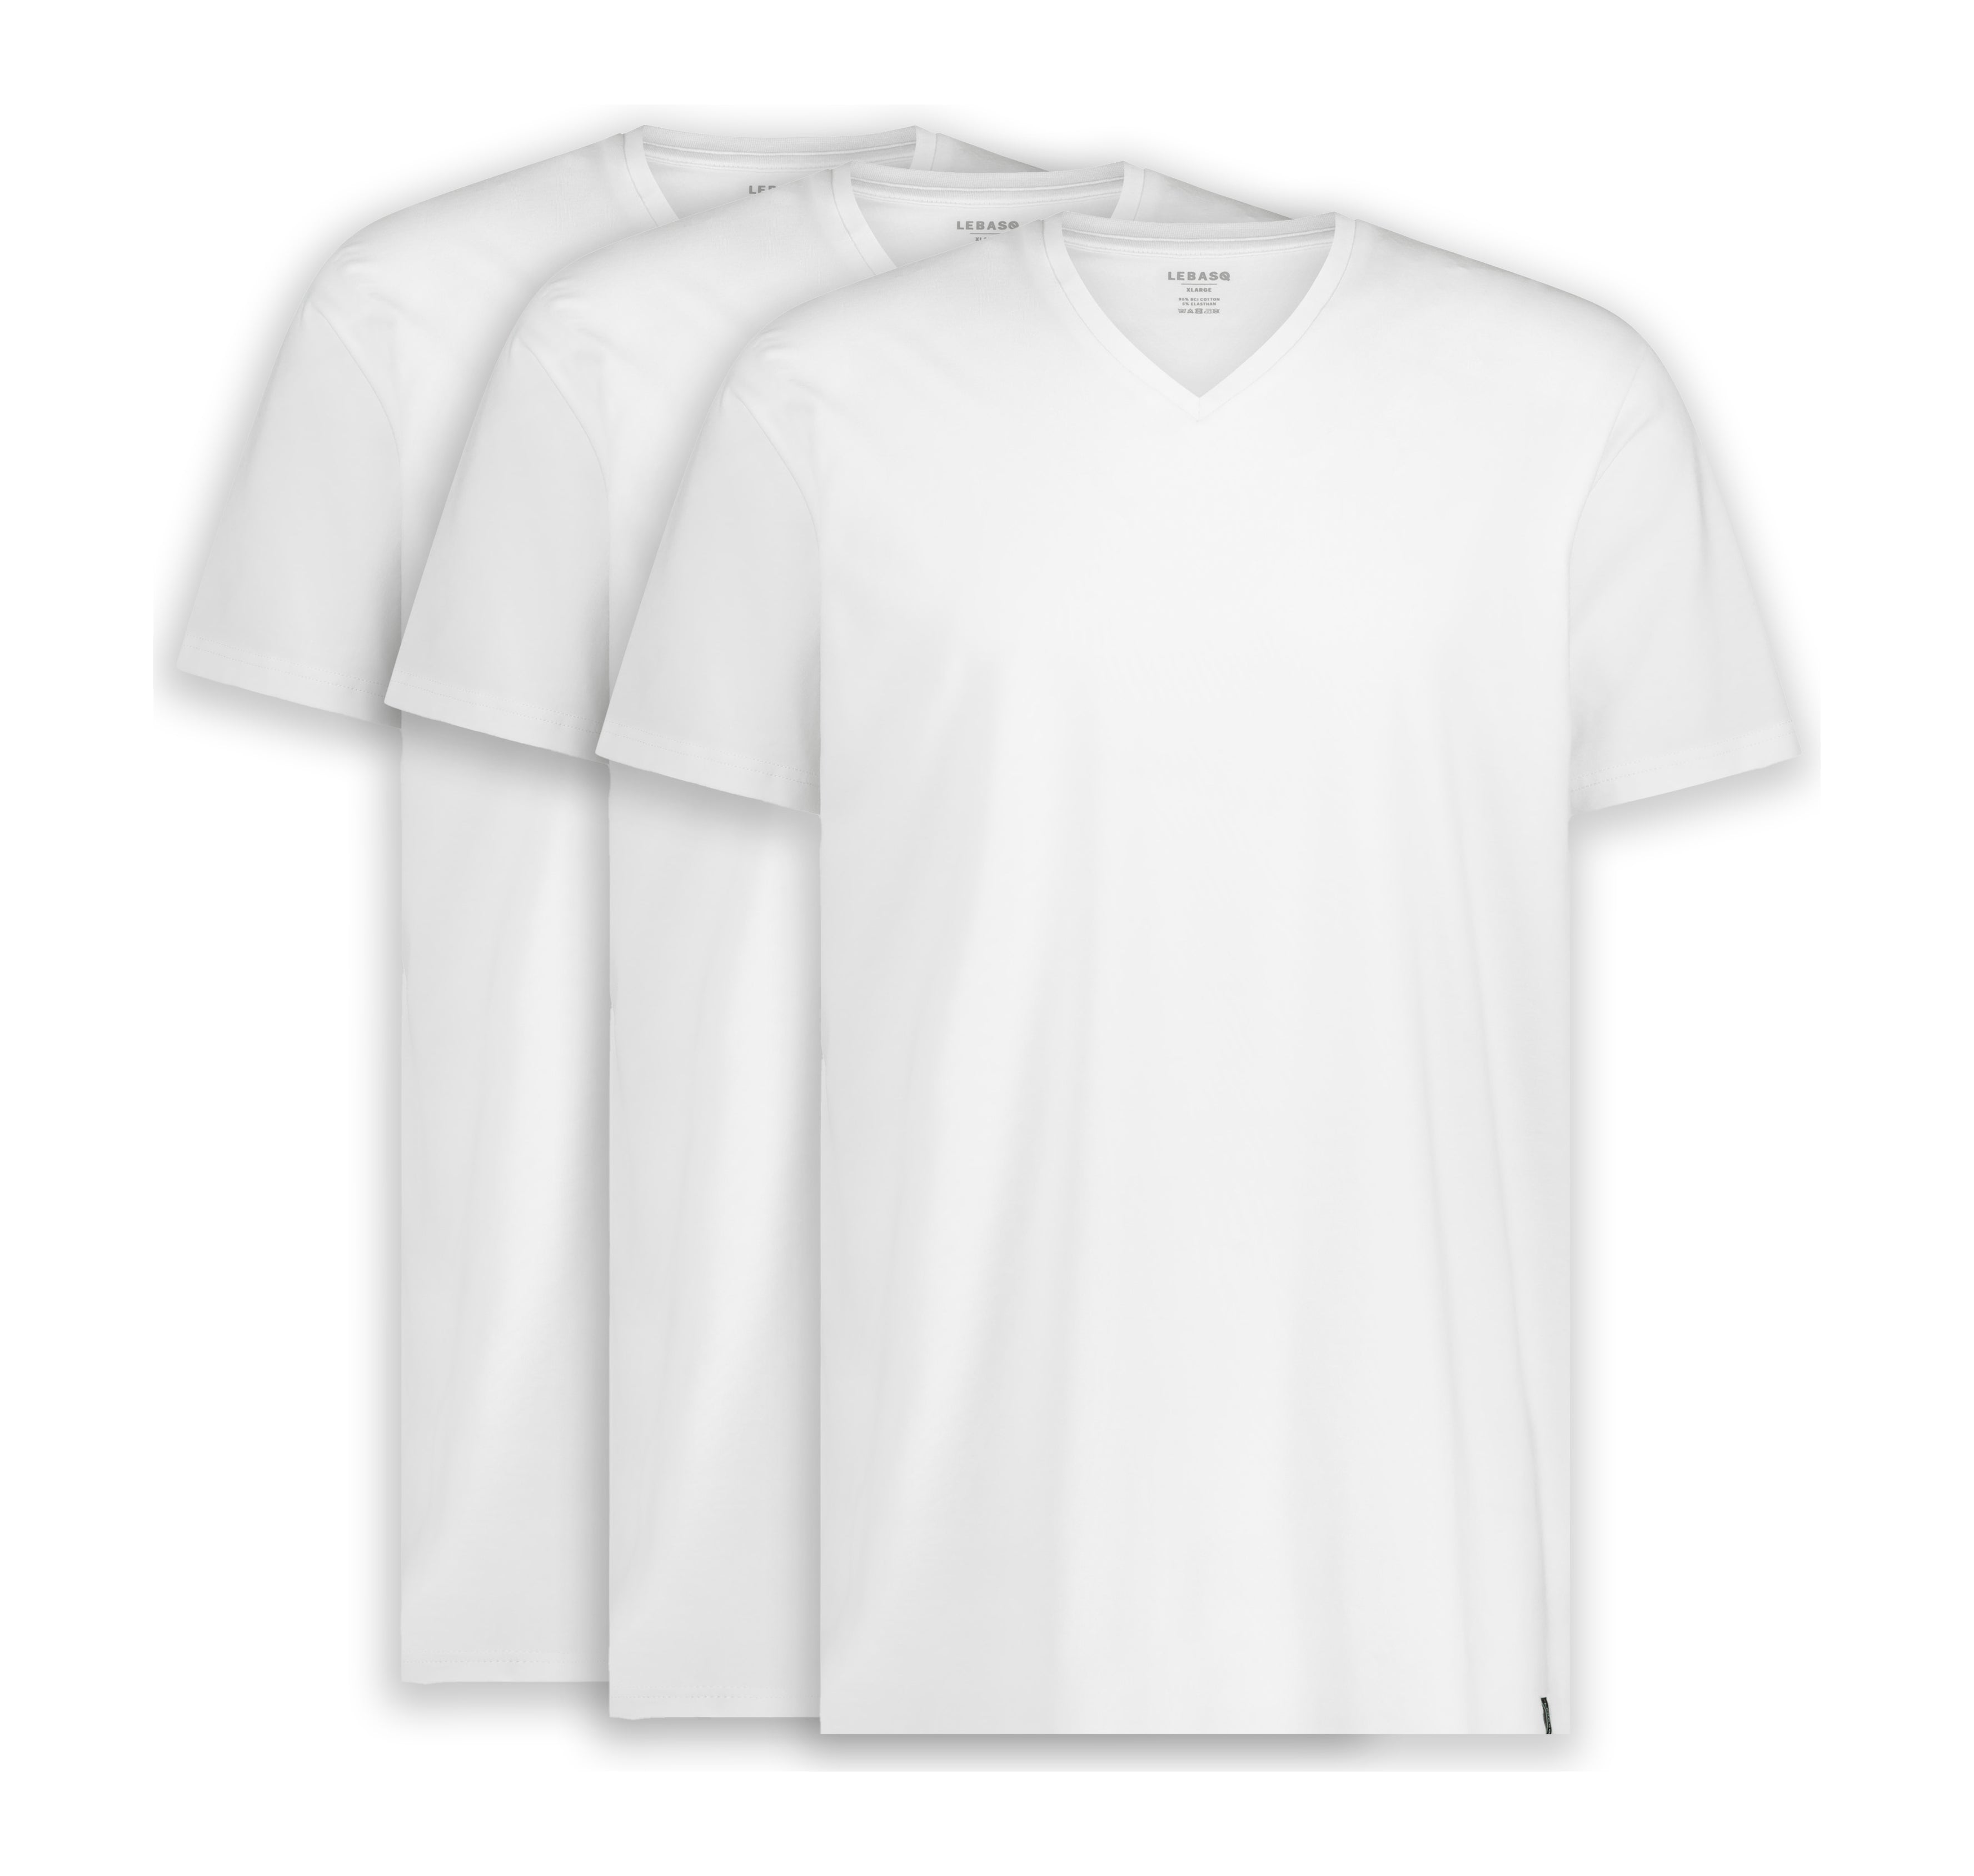 Stan's V Neck White 3 Pack - Classic Fit